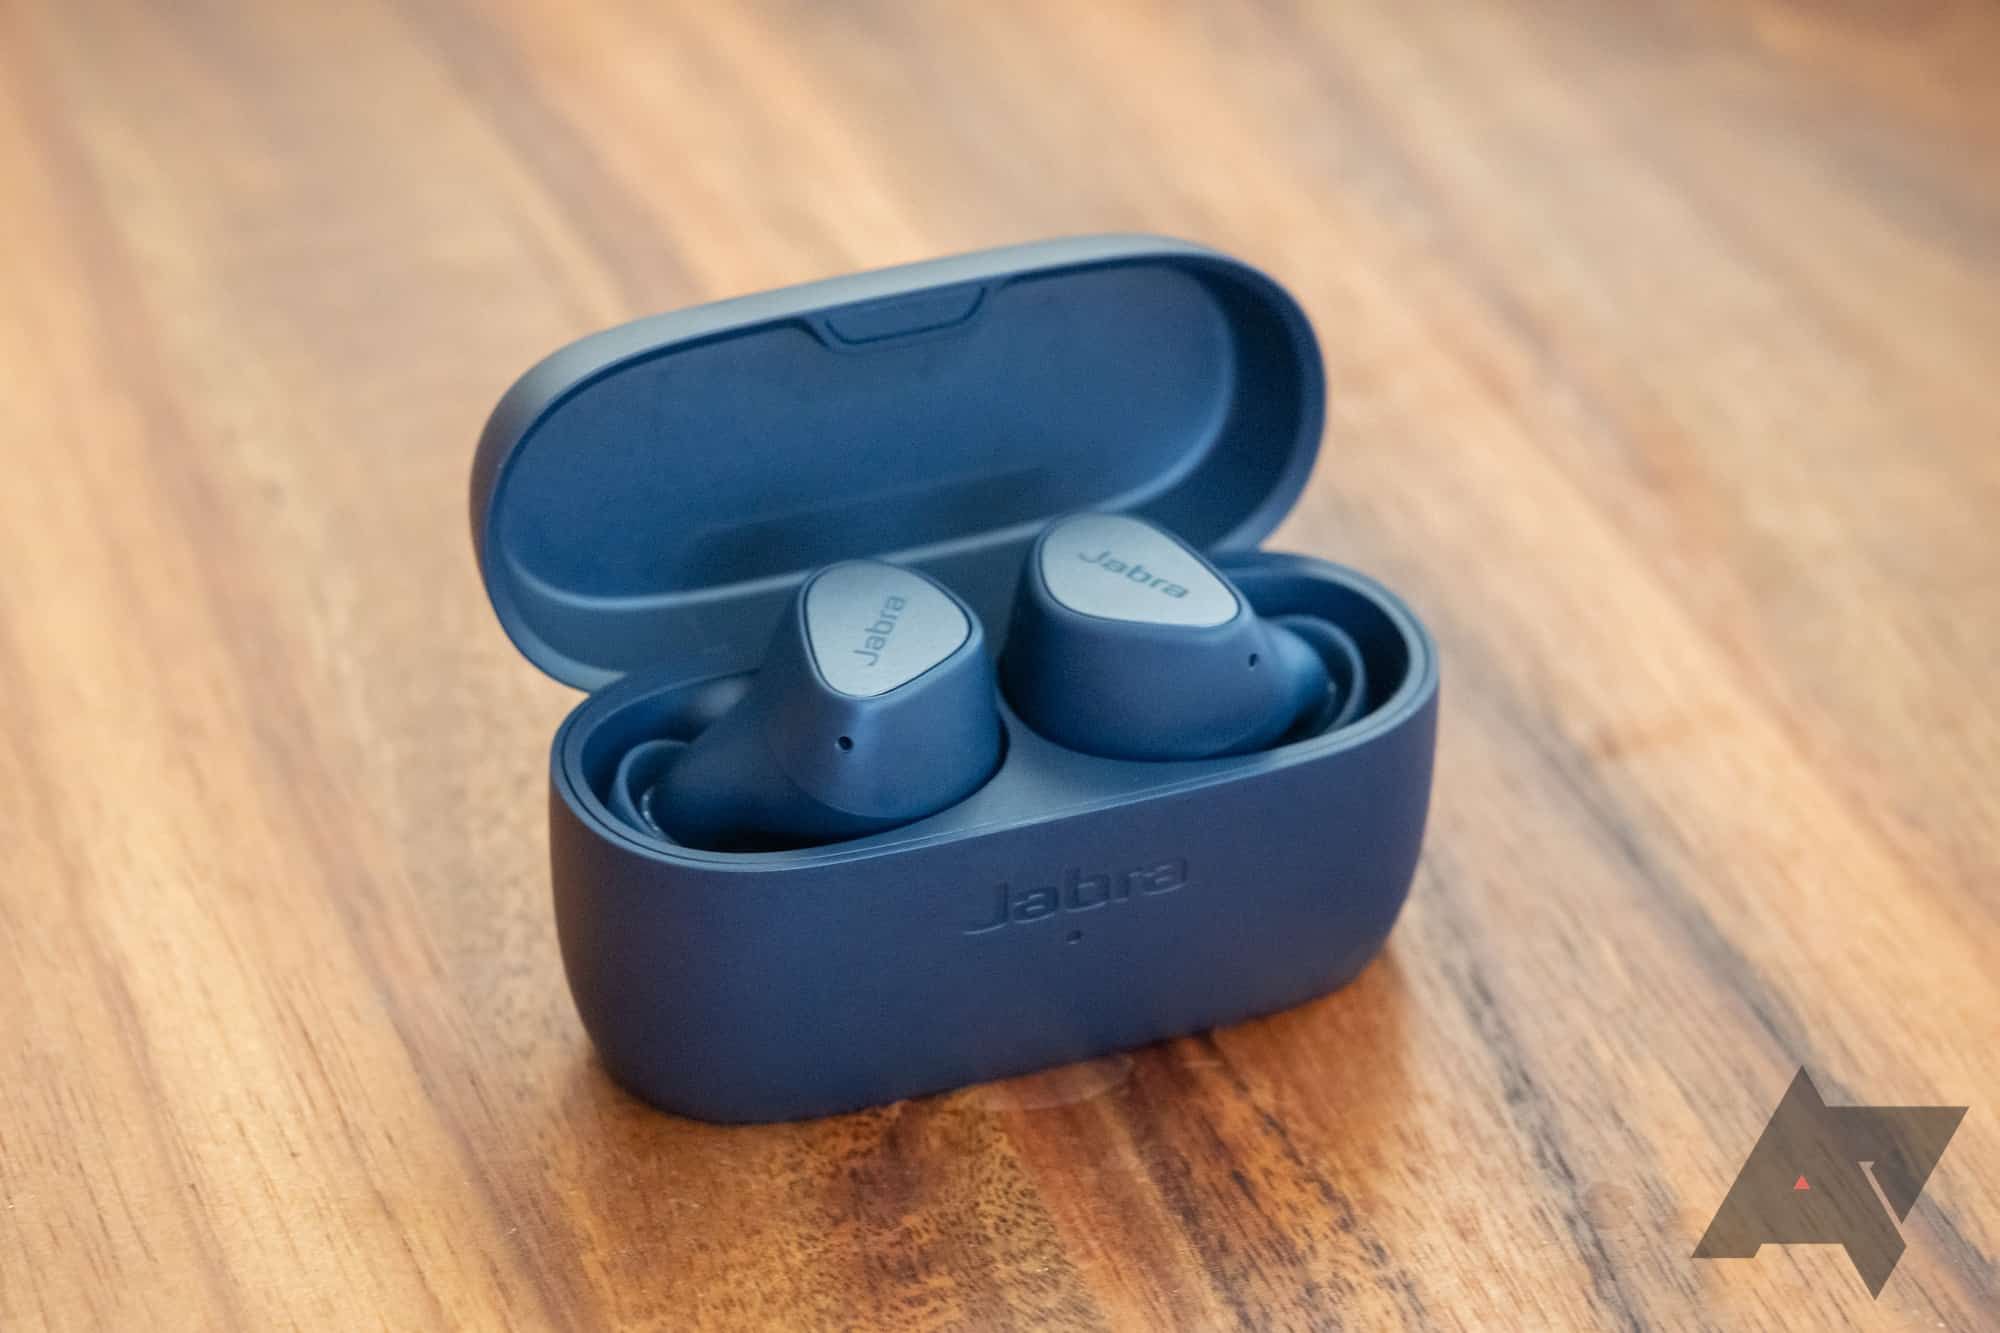 Jabra Elite 4 review: These $99 buds punch above their price range